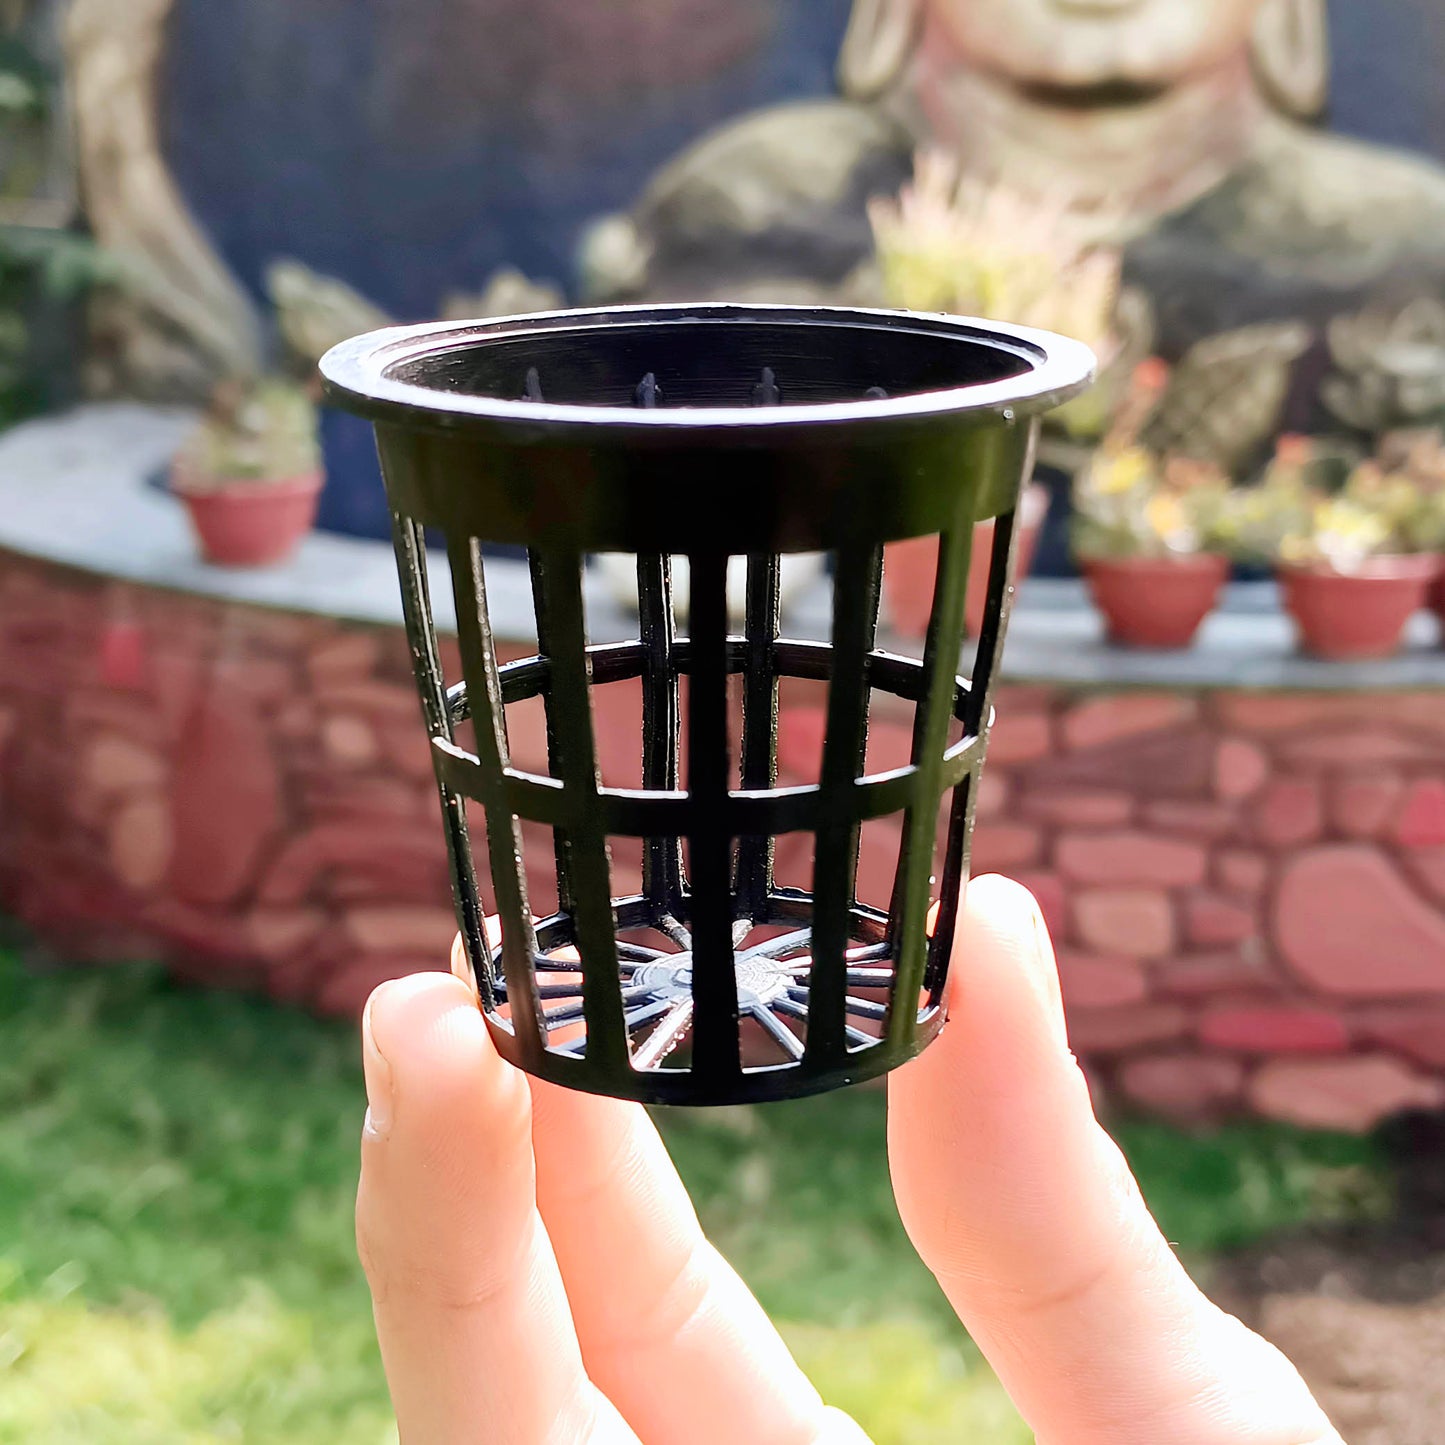 Casa De Amor Lightweight Economy Net Pot Cups for Hydroponics and Aquaponics - 2" Diameter Thin Lip Design with Slotted Mesh Sides- Black